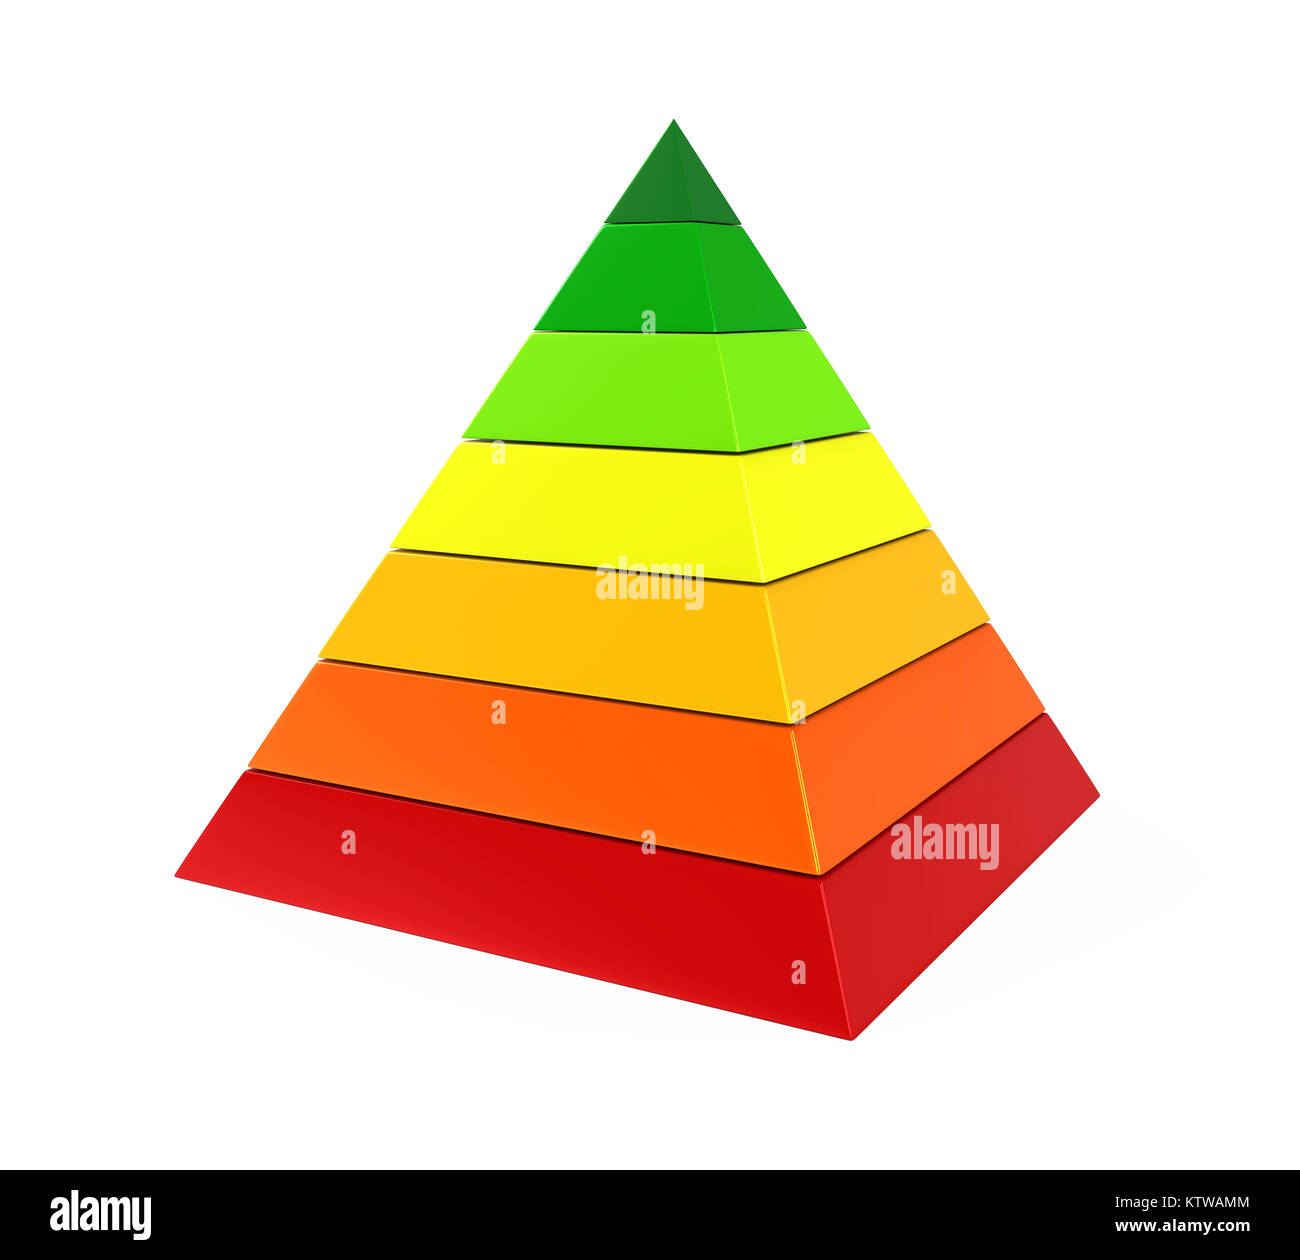 Colorful Pyramid Chart Isolated